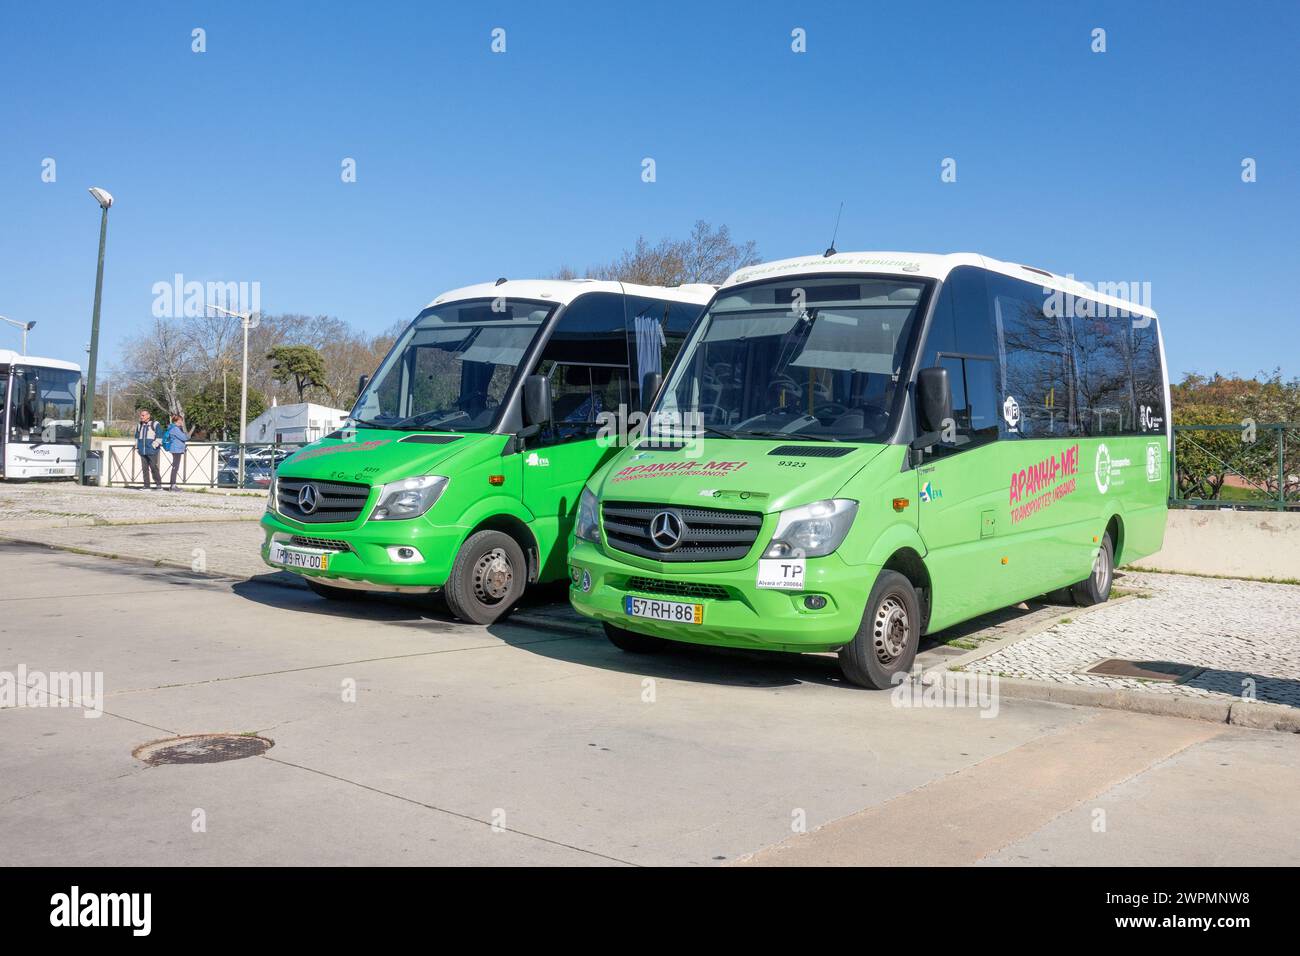 Urban Bus In Loule Portugal Operated By LC Global in Loulé Distinctive Green Mercedes Mini Buses Servicing Loule, Vilamoura And Quarteira Portugal Stock Photo